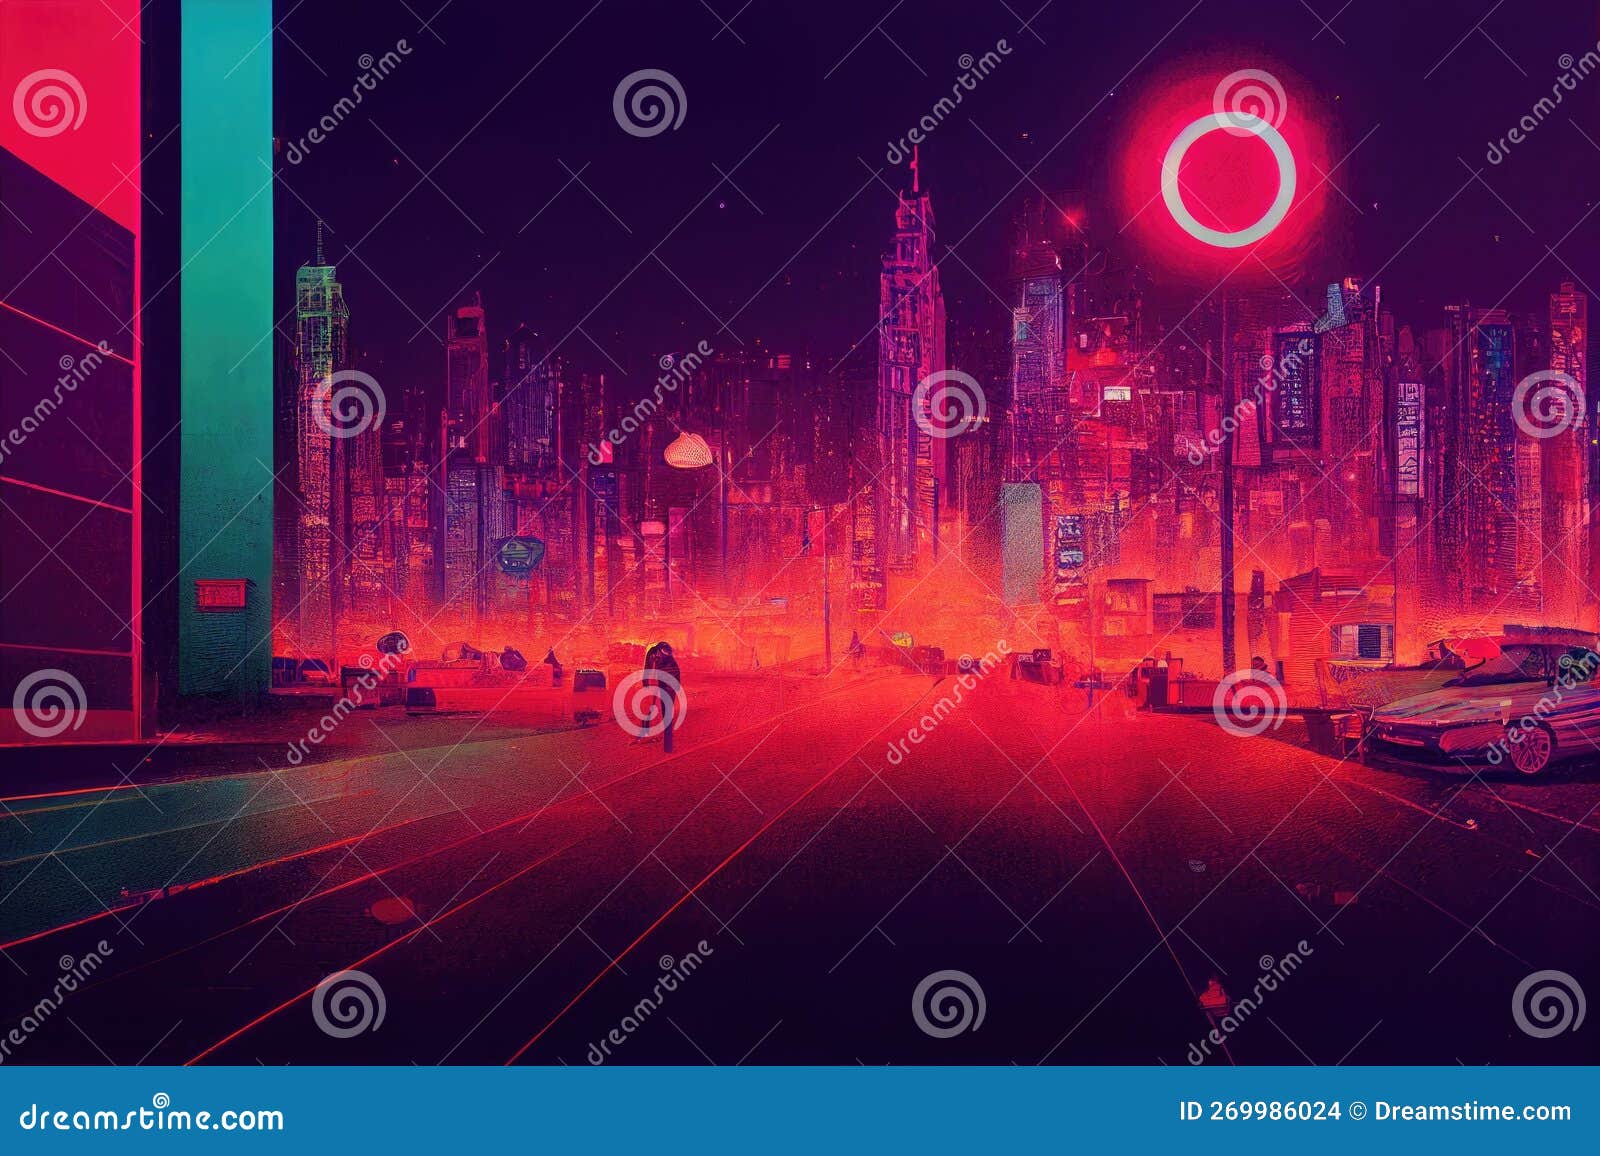 Futuristic Neon Technology City Cyberpunk Background, Cyberpunk City, Neon  Light, Technology Background Image And Wallpaper for Free Download